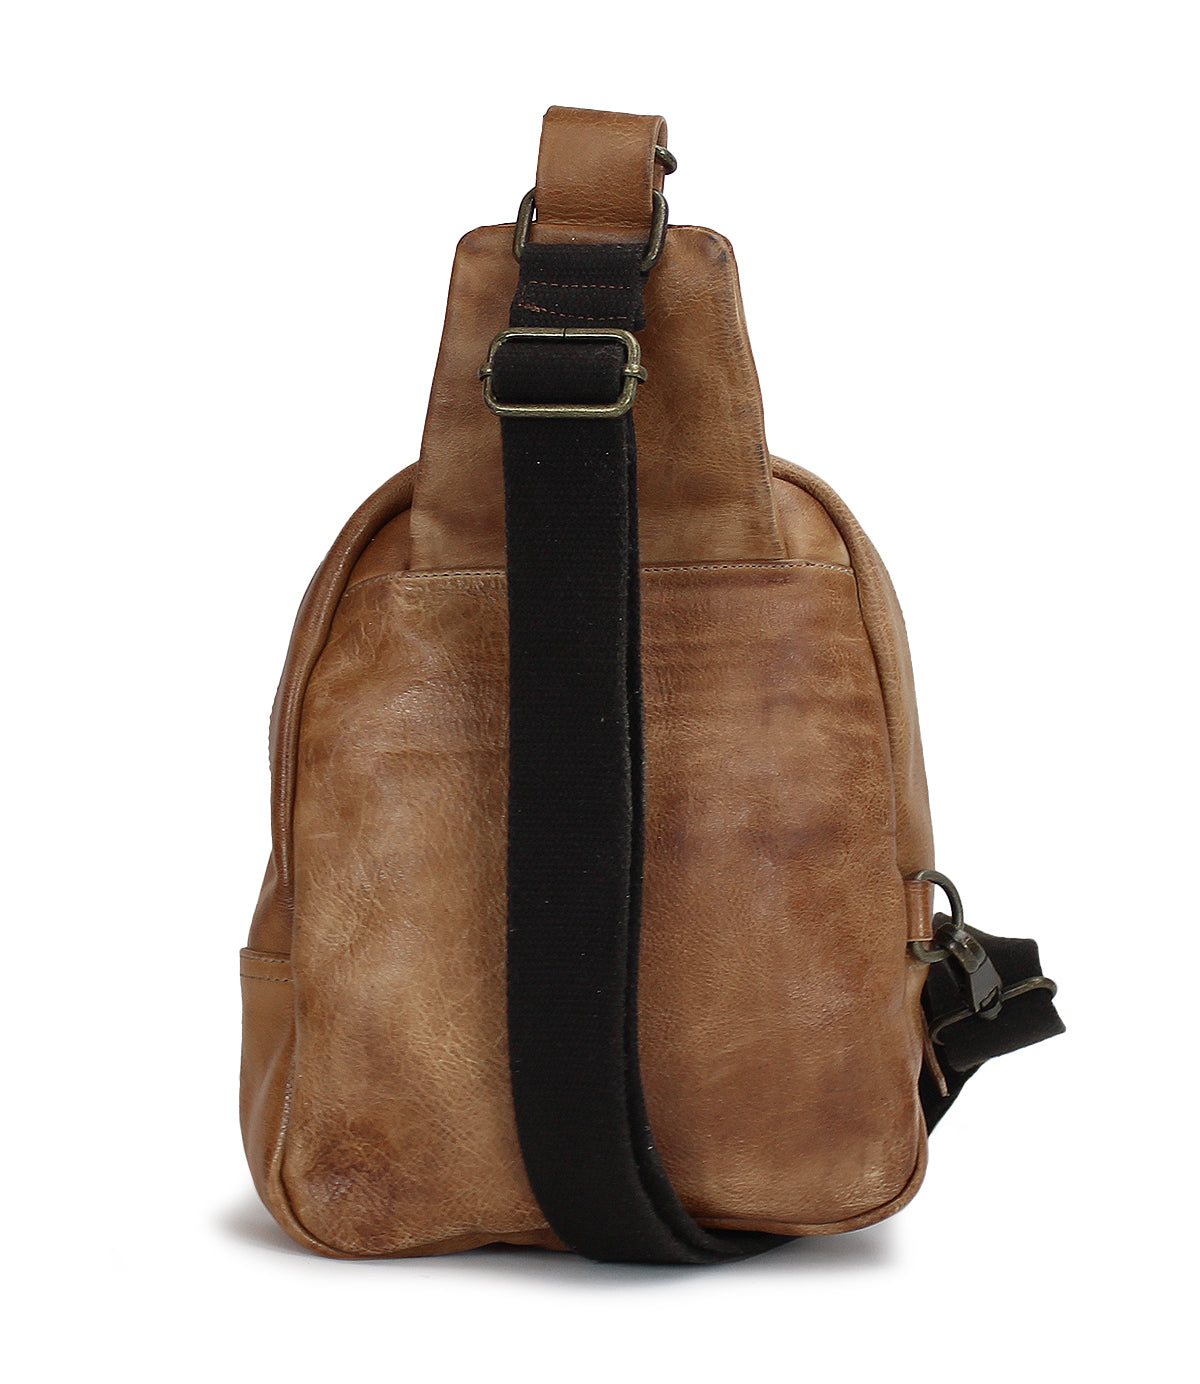 A Beau brown leather sling bag with black straps by Bed Stu.